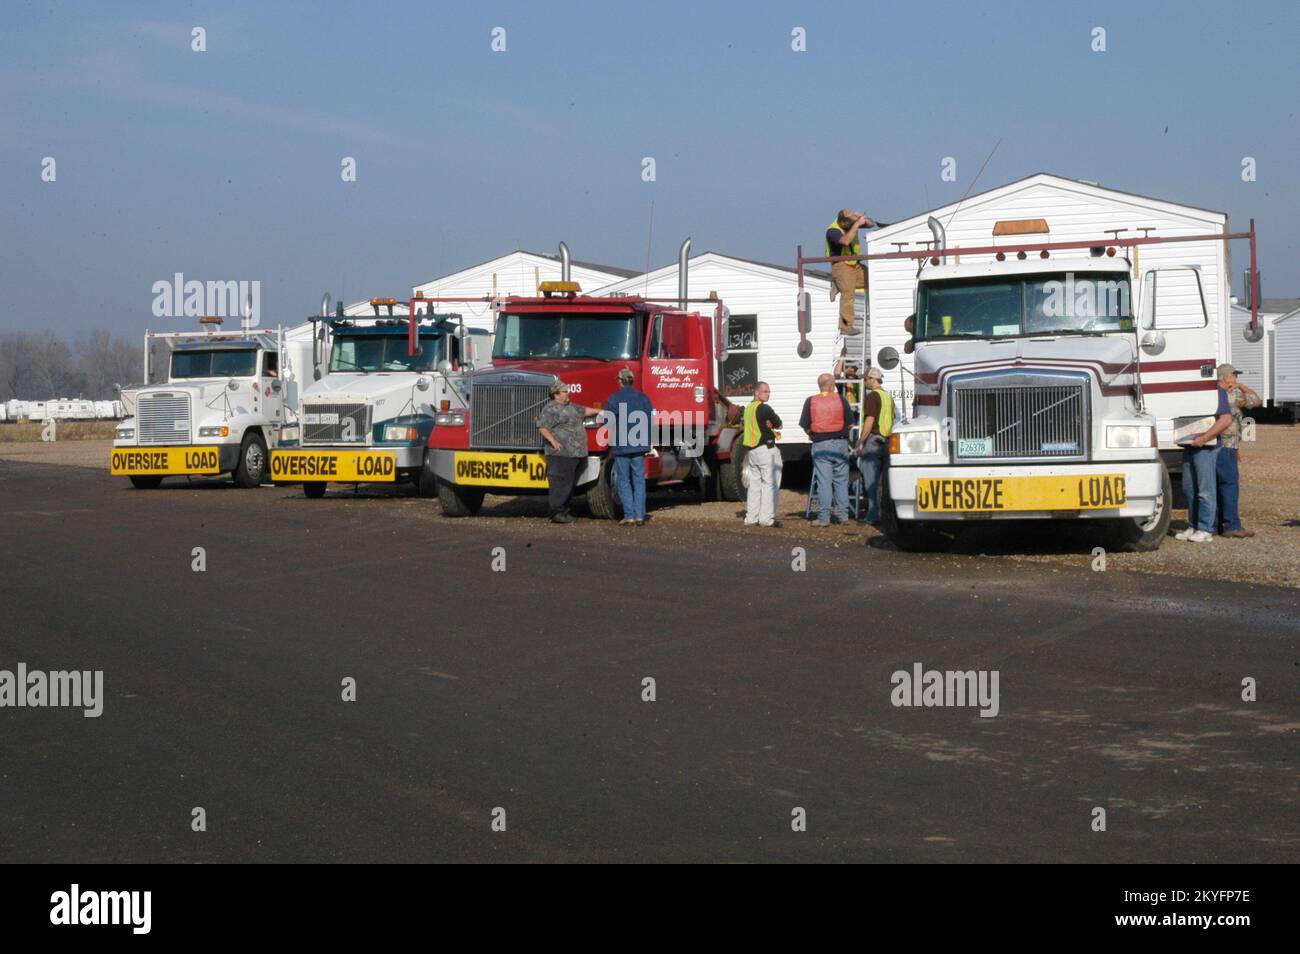 Hurricane Katrina, HOPE, AR, March 10, 2007 -- Tractor trailer rigs prepare to tow four of 23 mobile homes that are heading to Dumas, AR to serve as emergency housing for those recently affected by tornadoes. FEMA Stock Photo